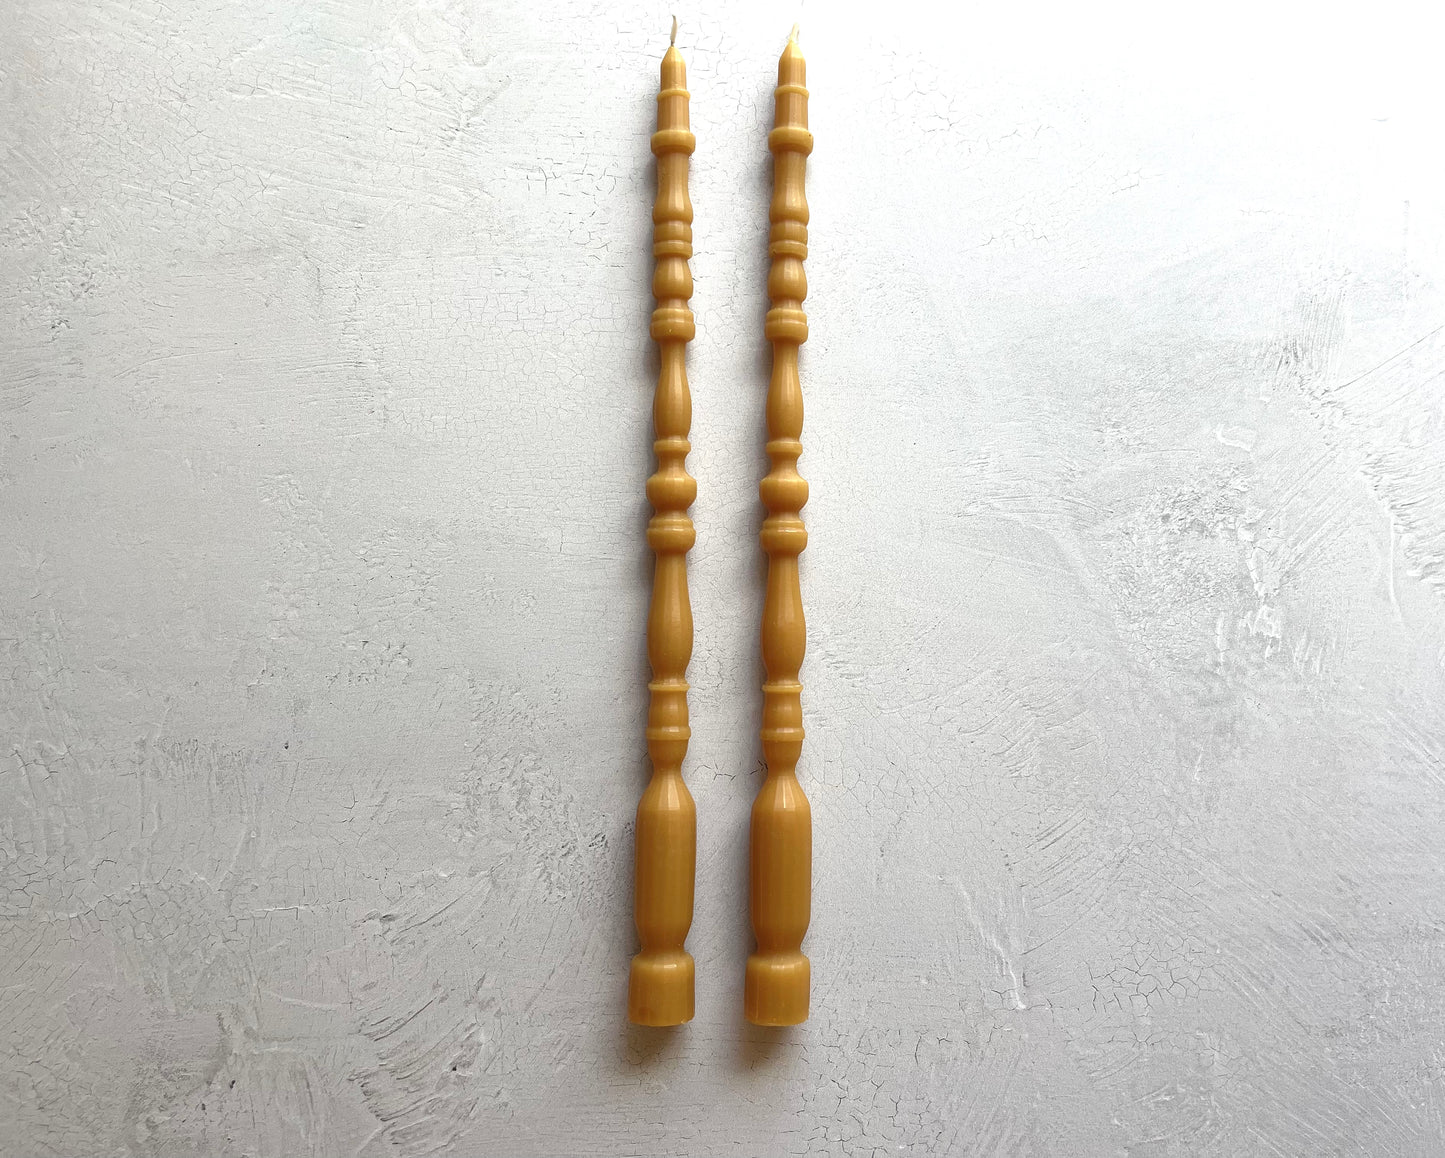 Spindle leg tapers